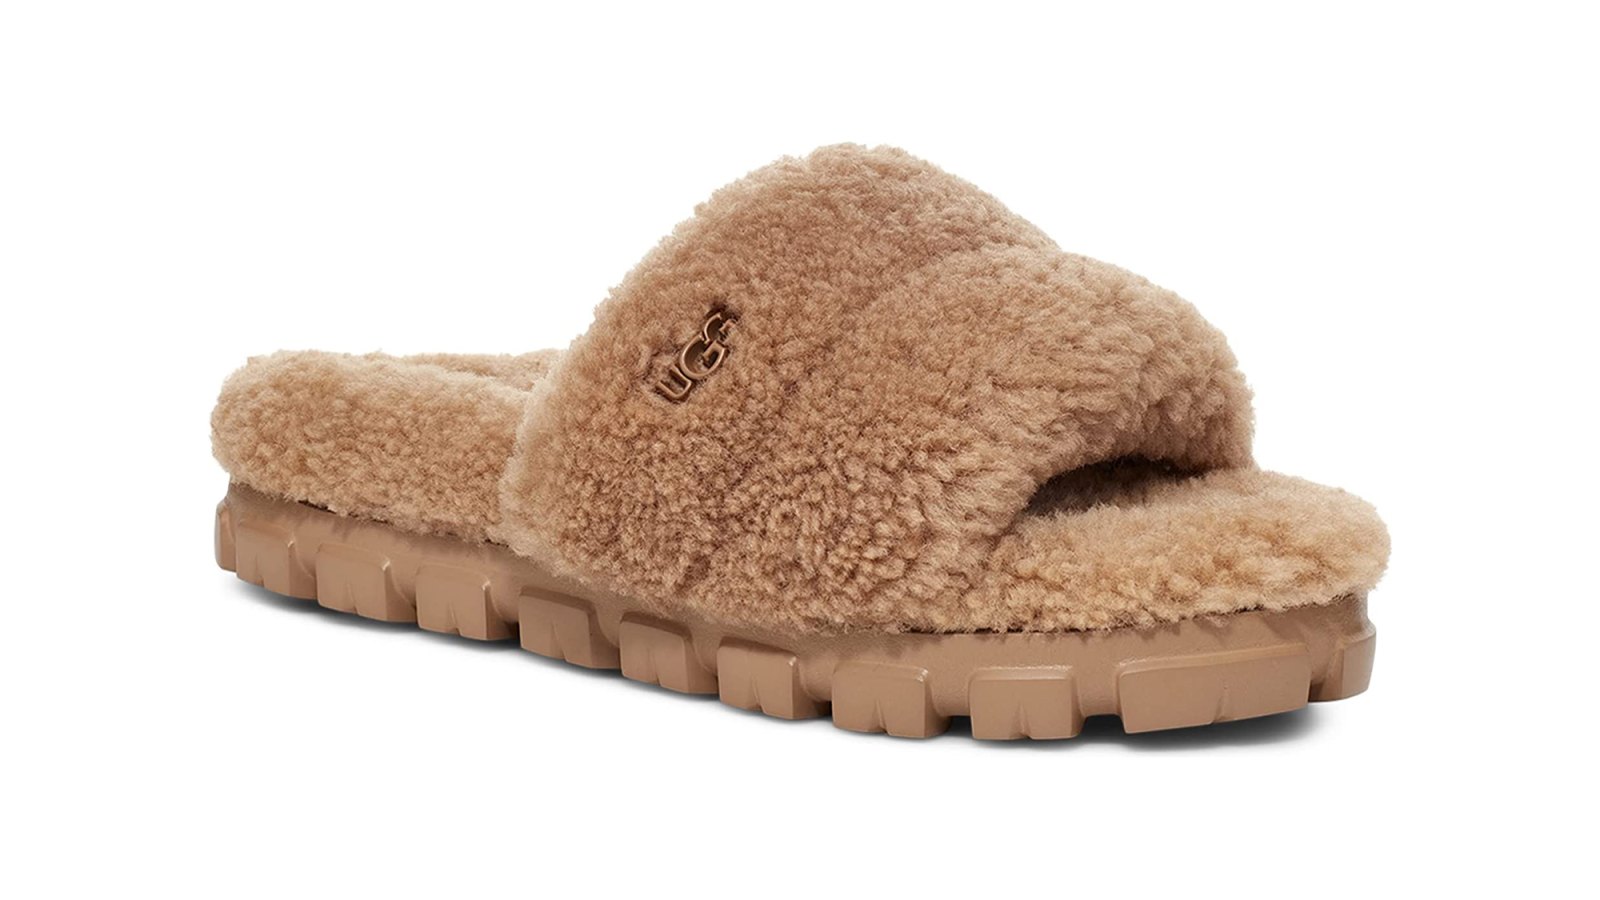 8 Ugg Outfits That Prove Those Boots and Slides Are Way More